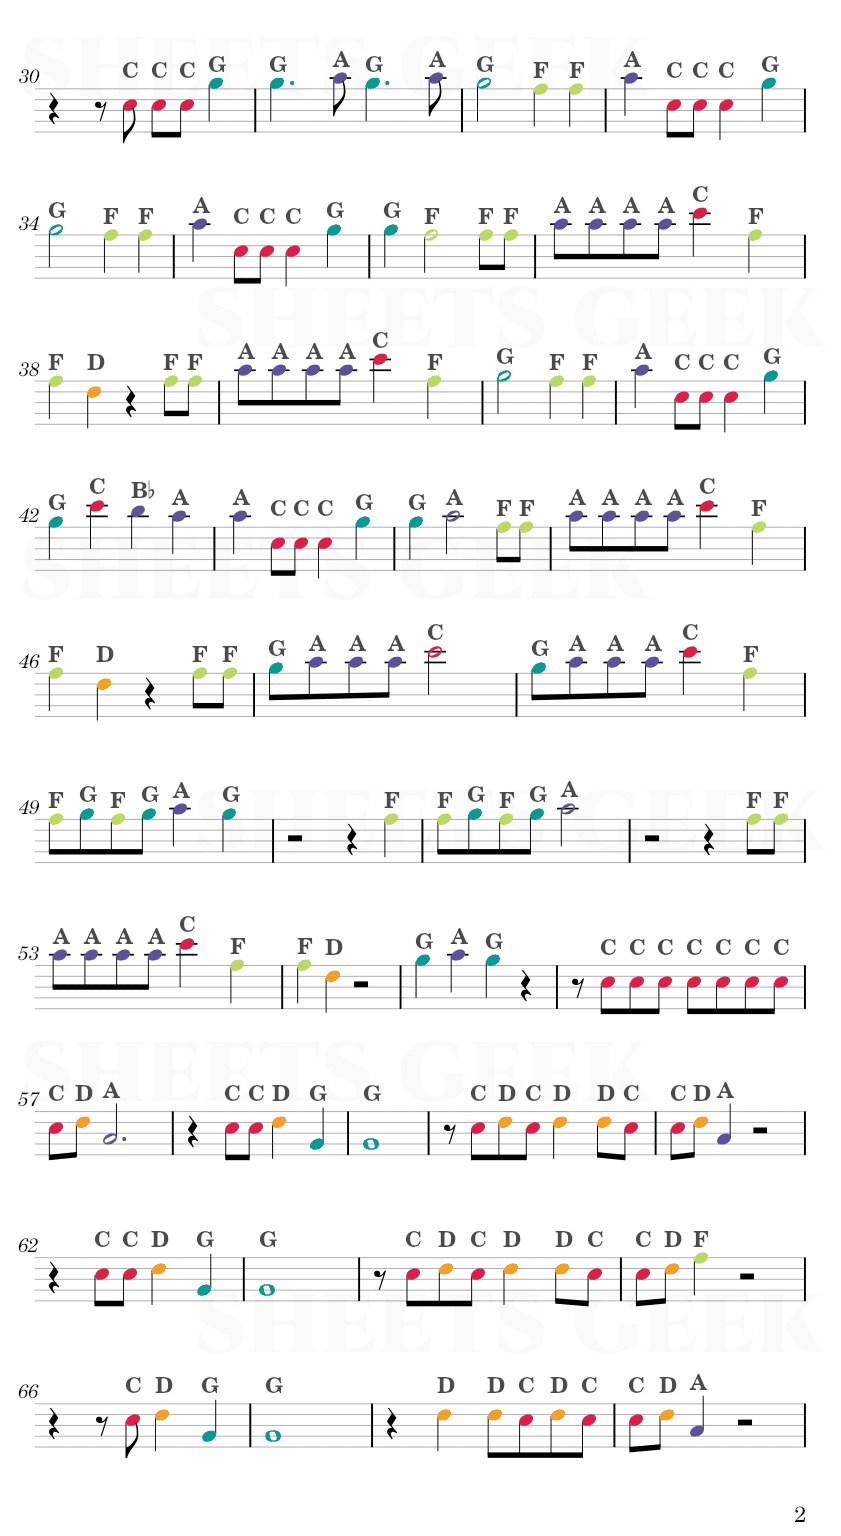 She's All I Wanna Be - Tate McRae Easy Sheet Music Free for piano, keyboard, flute, violin, sax, cello page 2